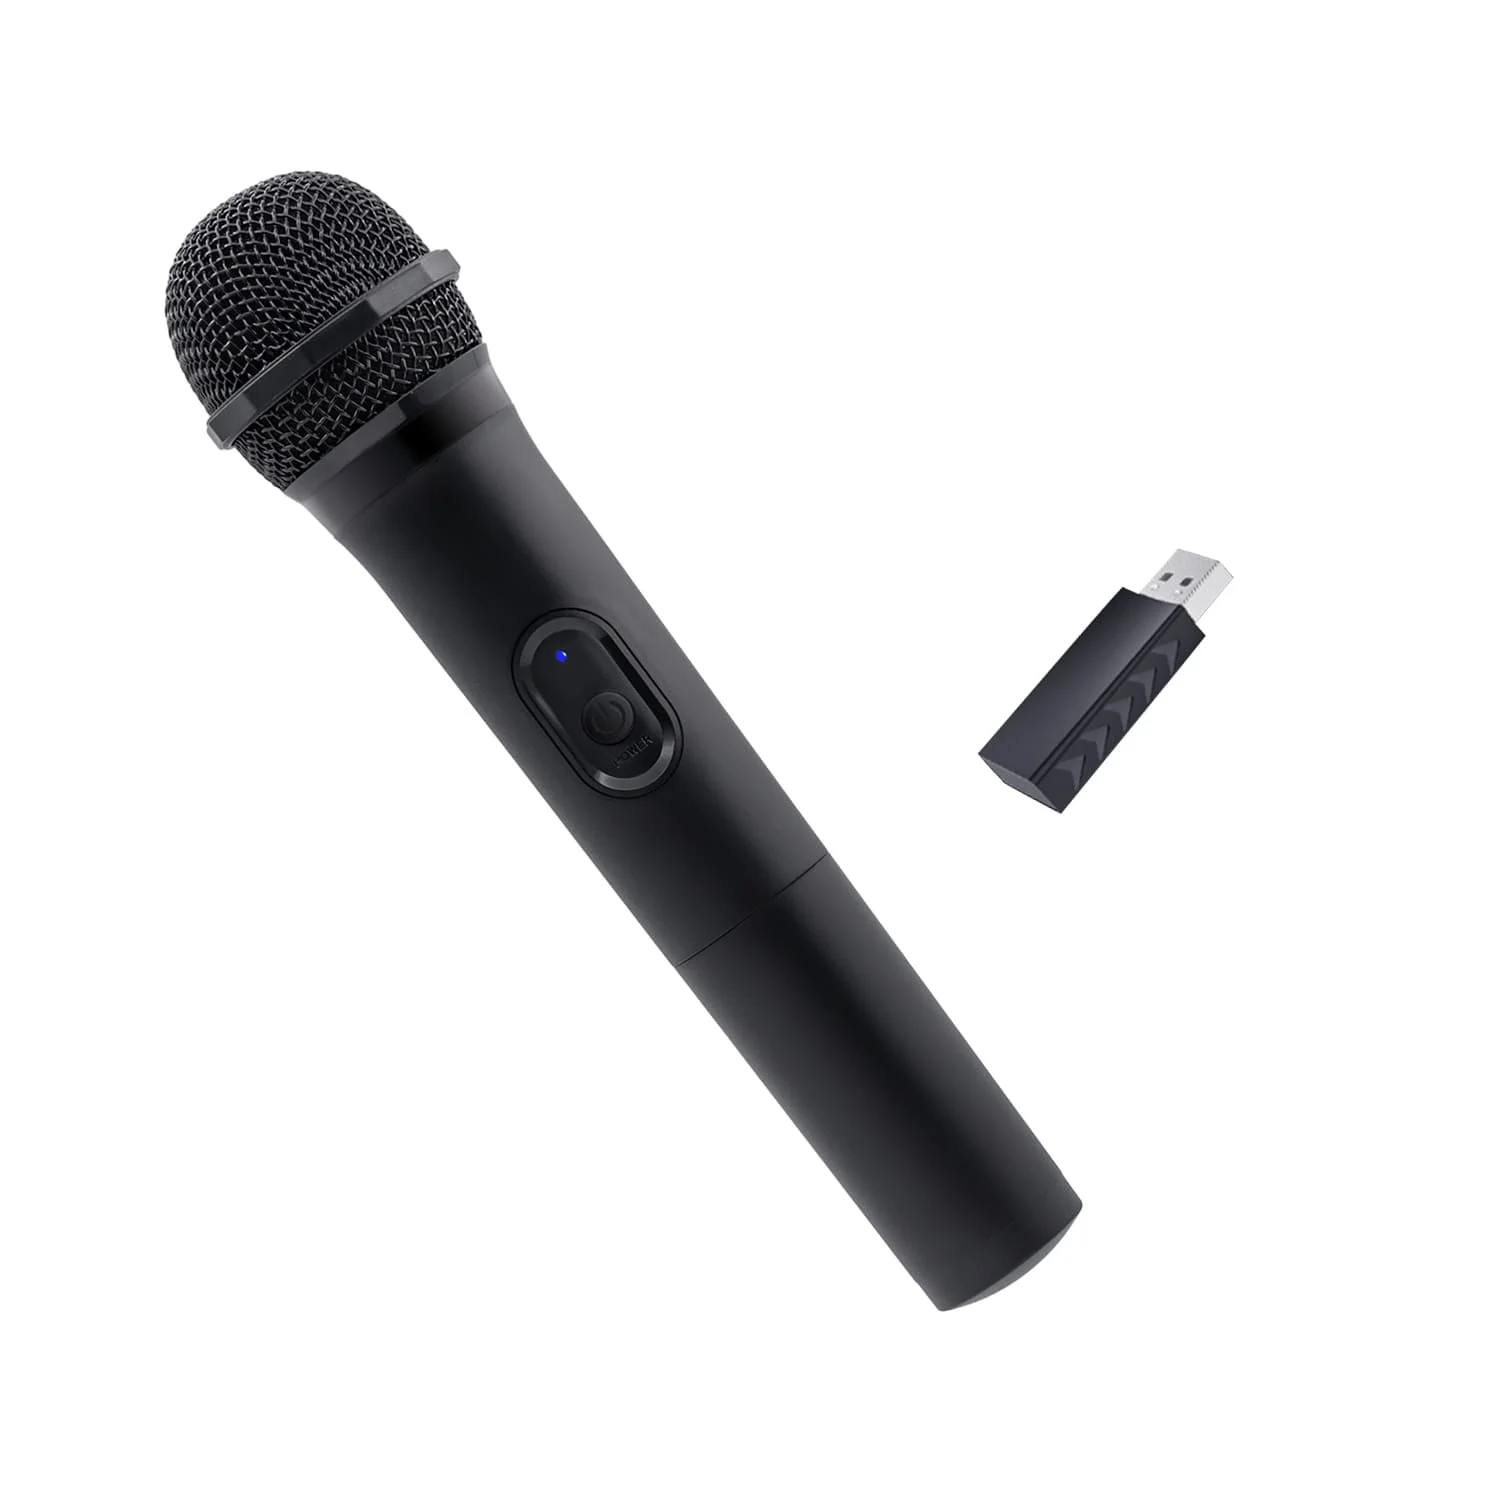 Honcam 25ms Low Latency 2.4G Wireless Gaming Microphone for